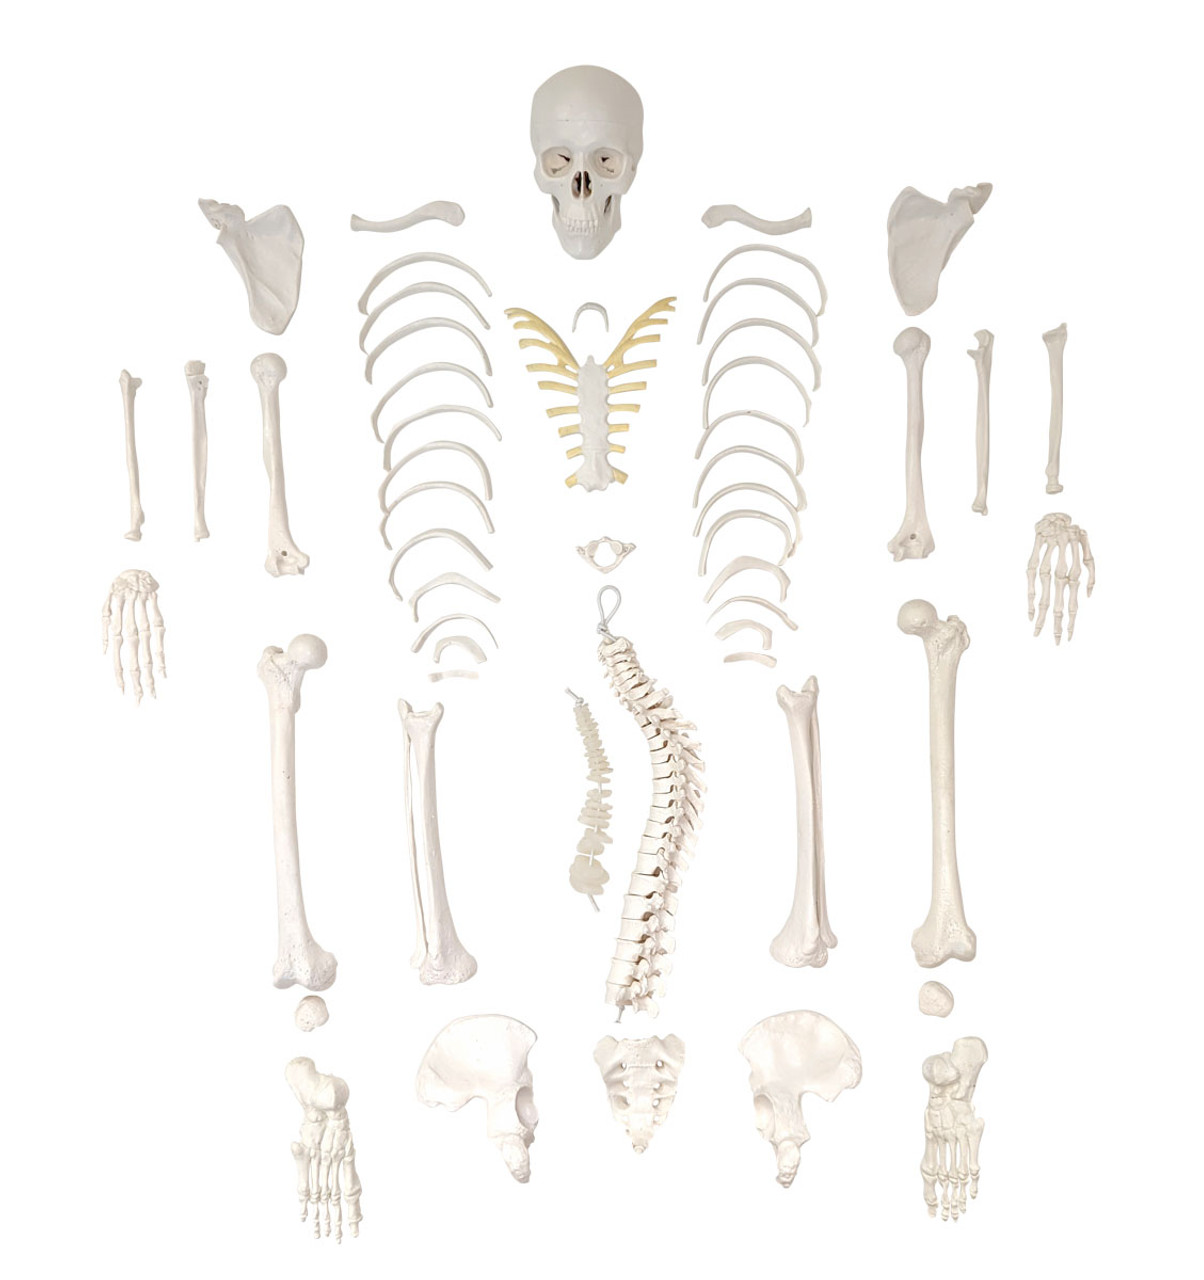 Axis Scientific Full-Size Adult Skeleton Anatomy Model - Made for